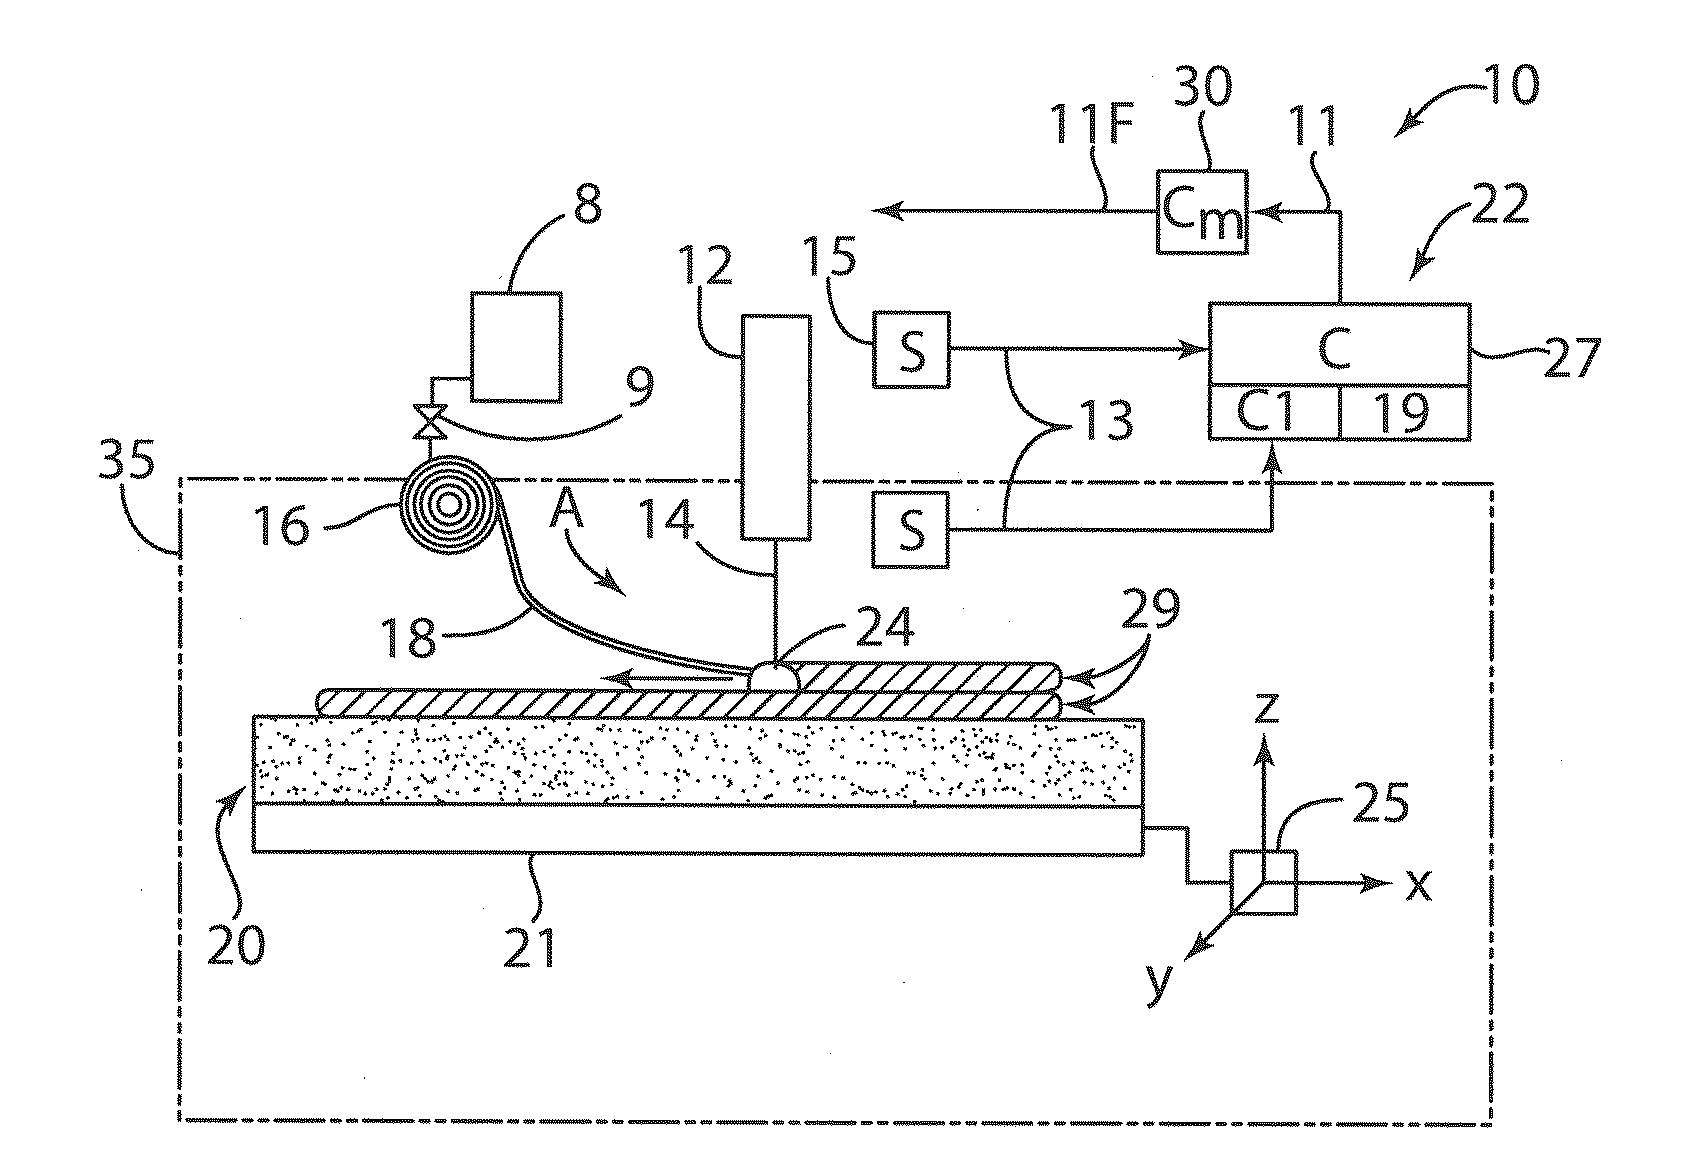 Gas Phase Alloying for Wire Fed Joining and Deposition Processes